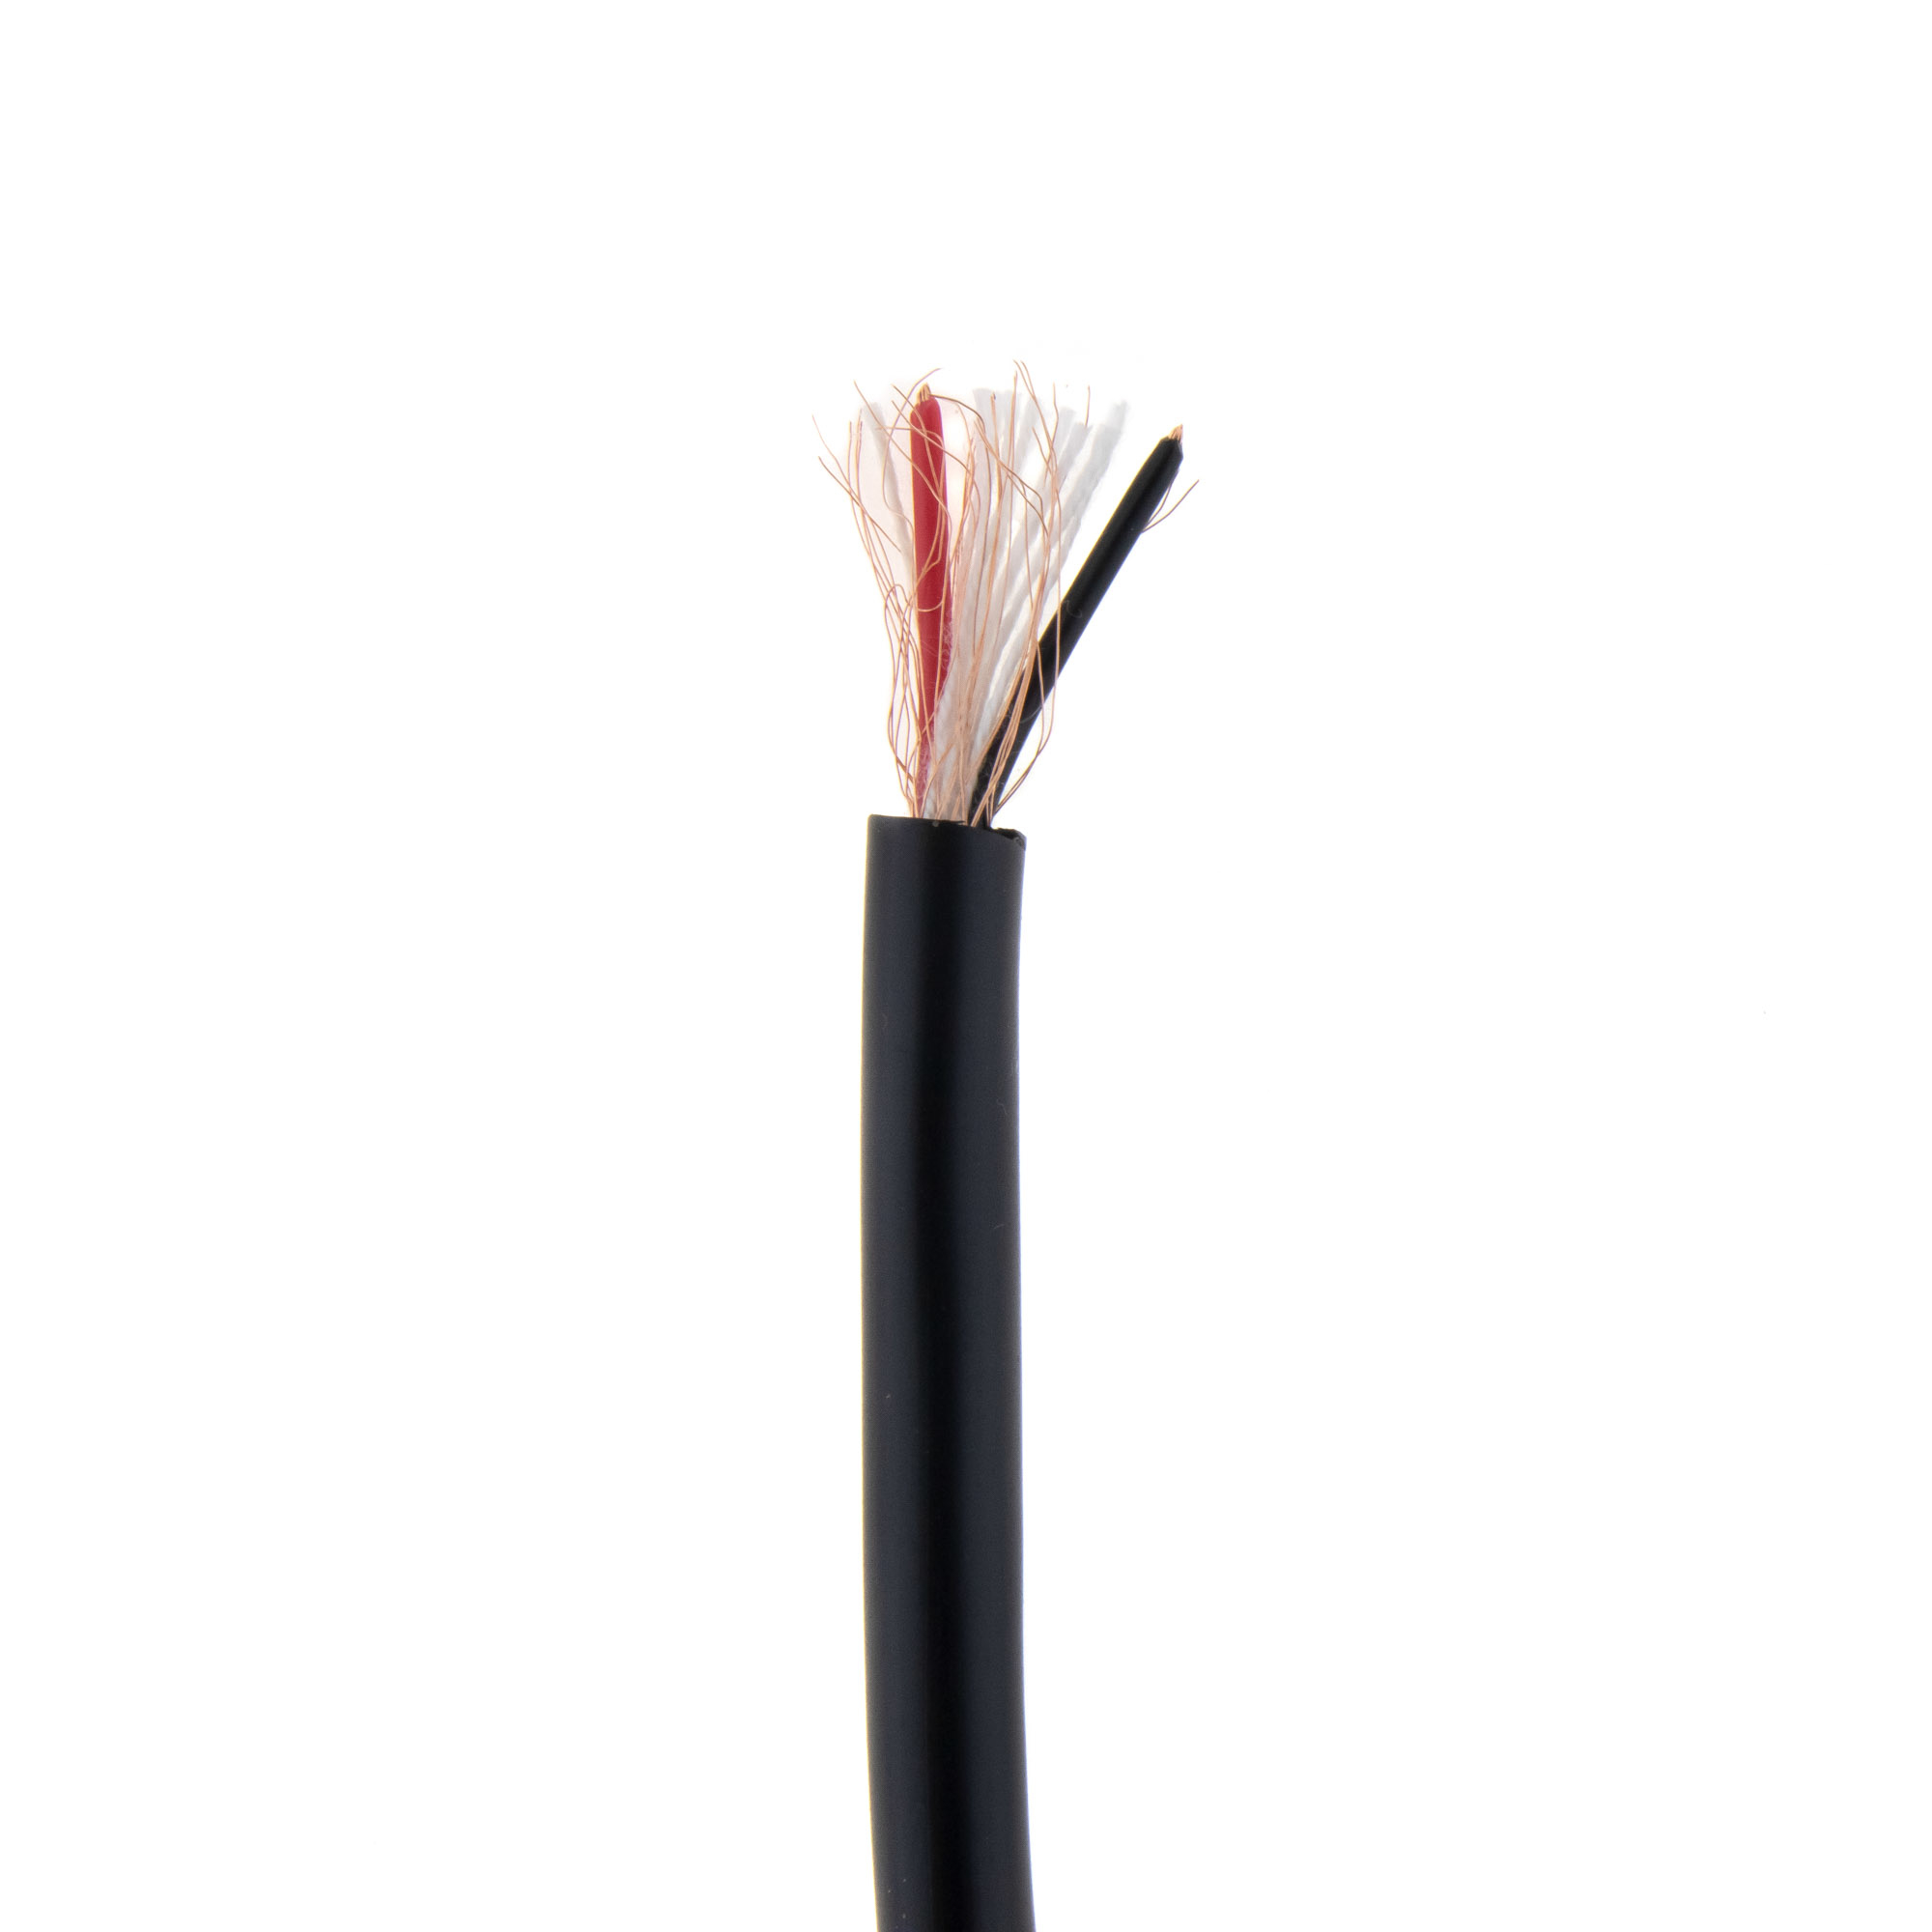 Microphone cable 25m, black